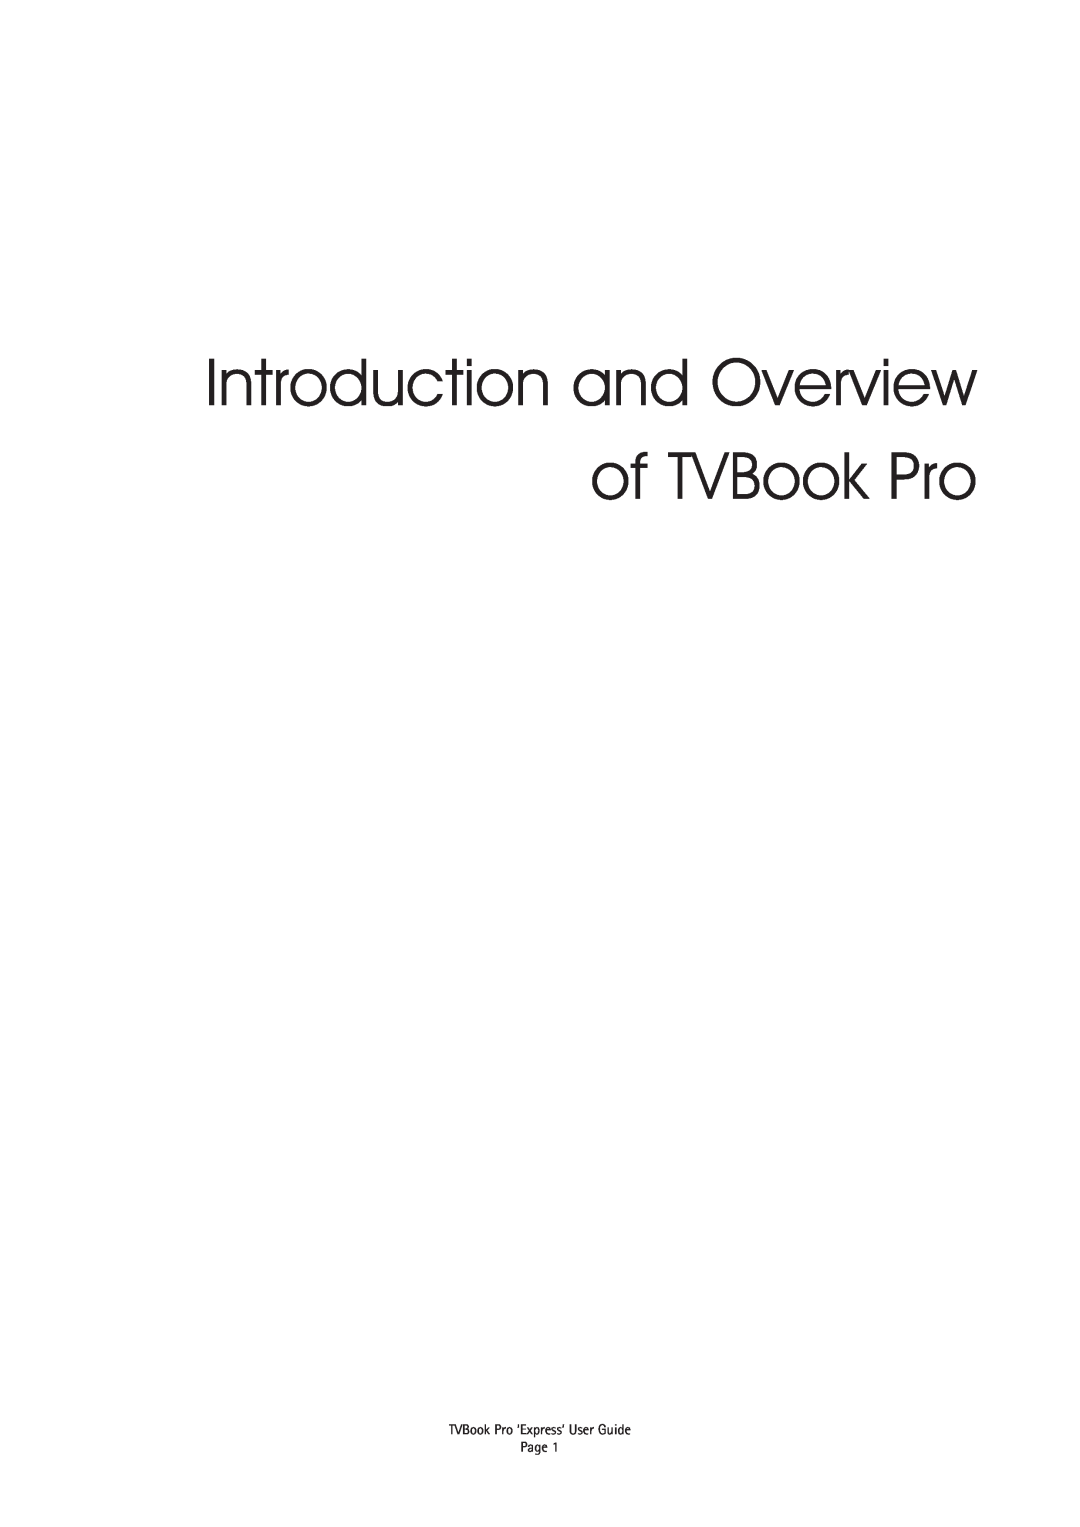 Miglia Technology TV Tuner Adapter manual Introduction and Overview of TVBook Pro, TVBook Pro ‘Express’ User Guide Page 